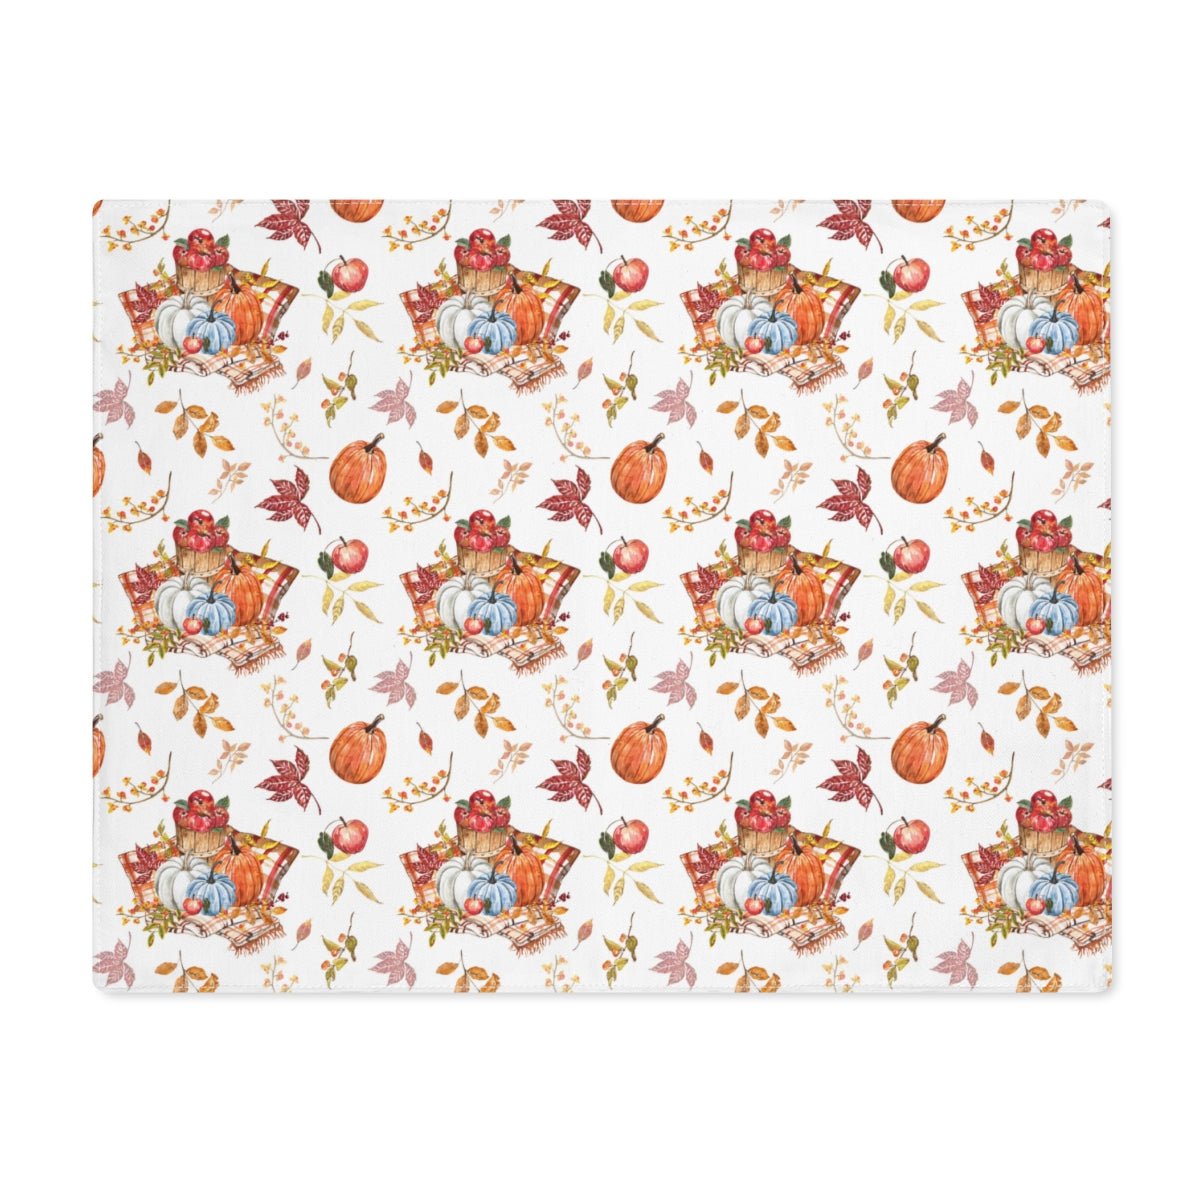 Fall Pumpkins and Apples Cotton Placemat - Puffin Lime